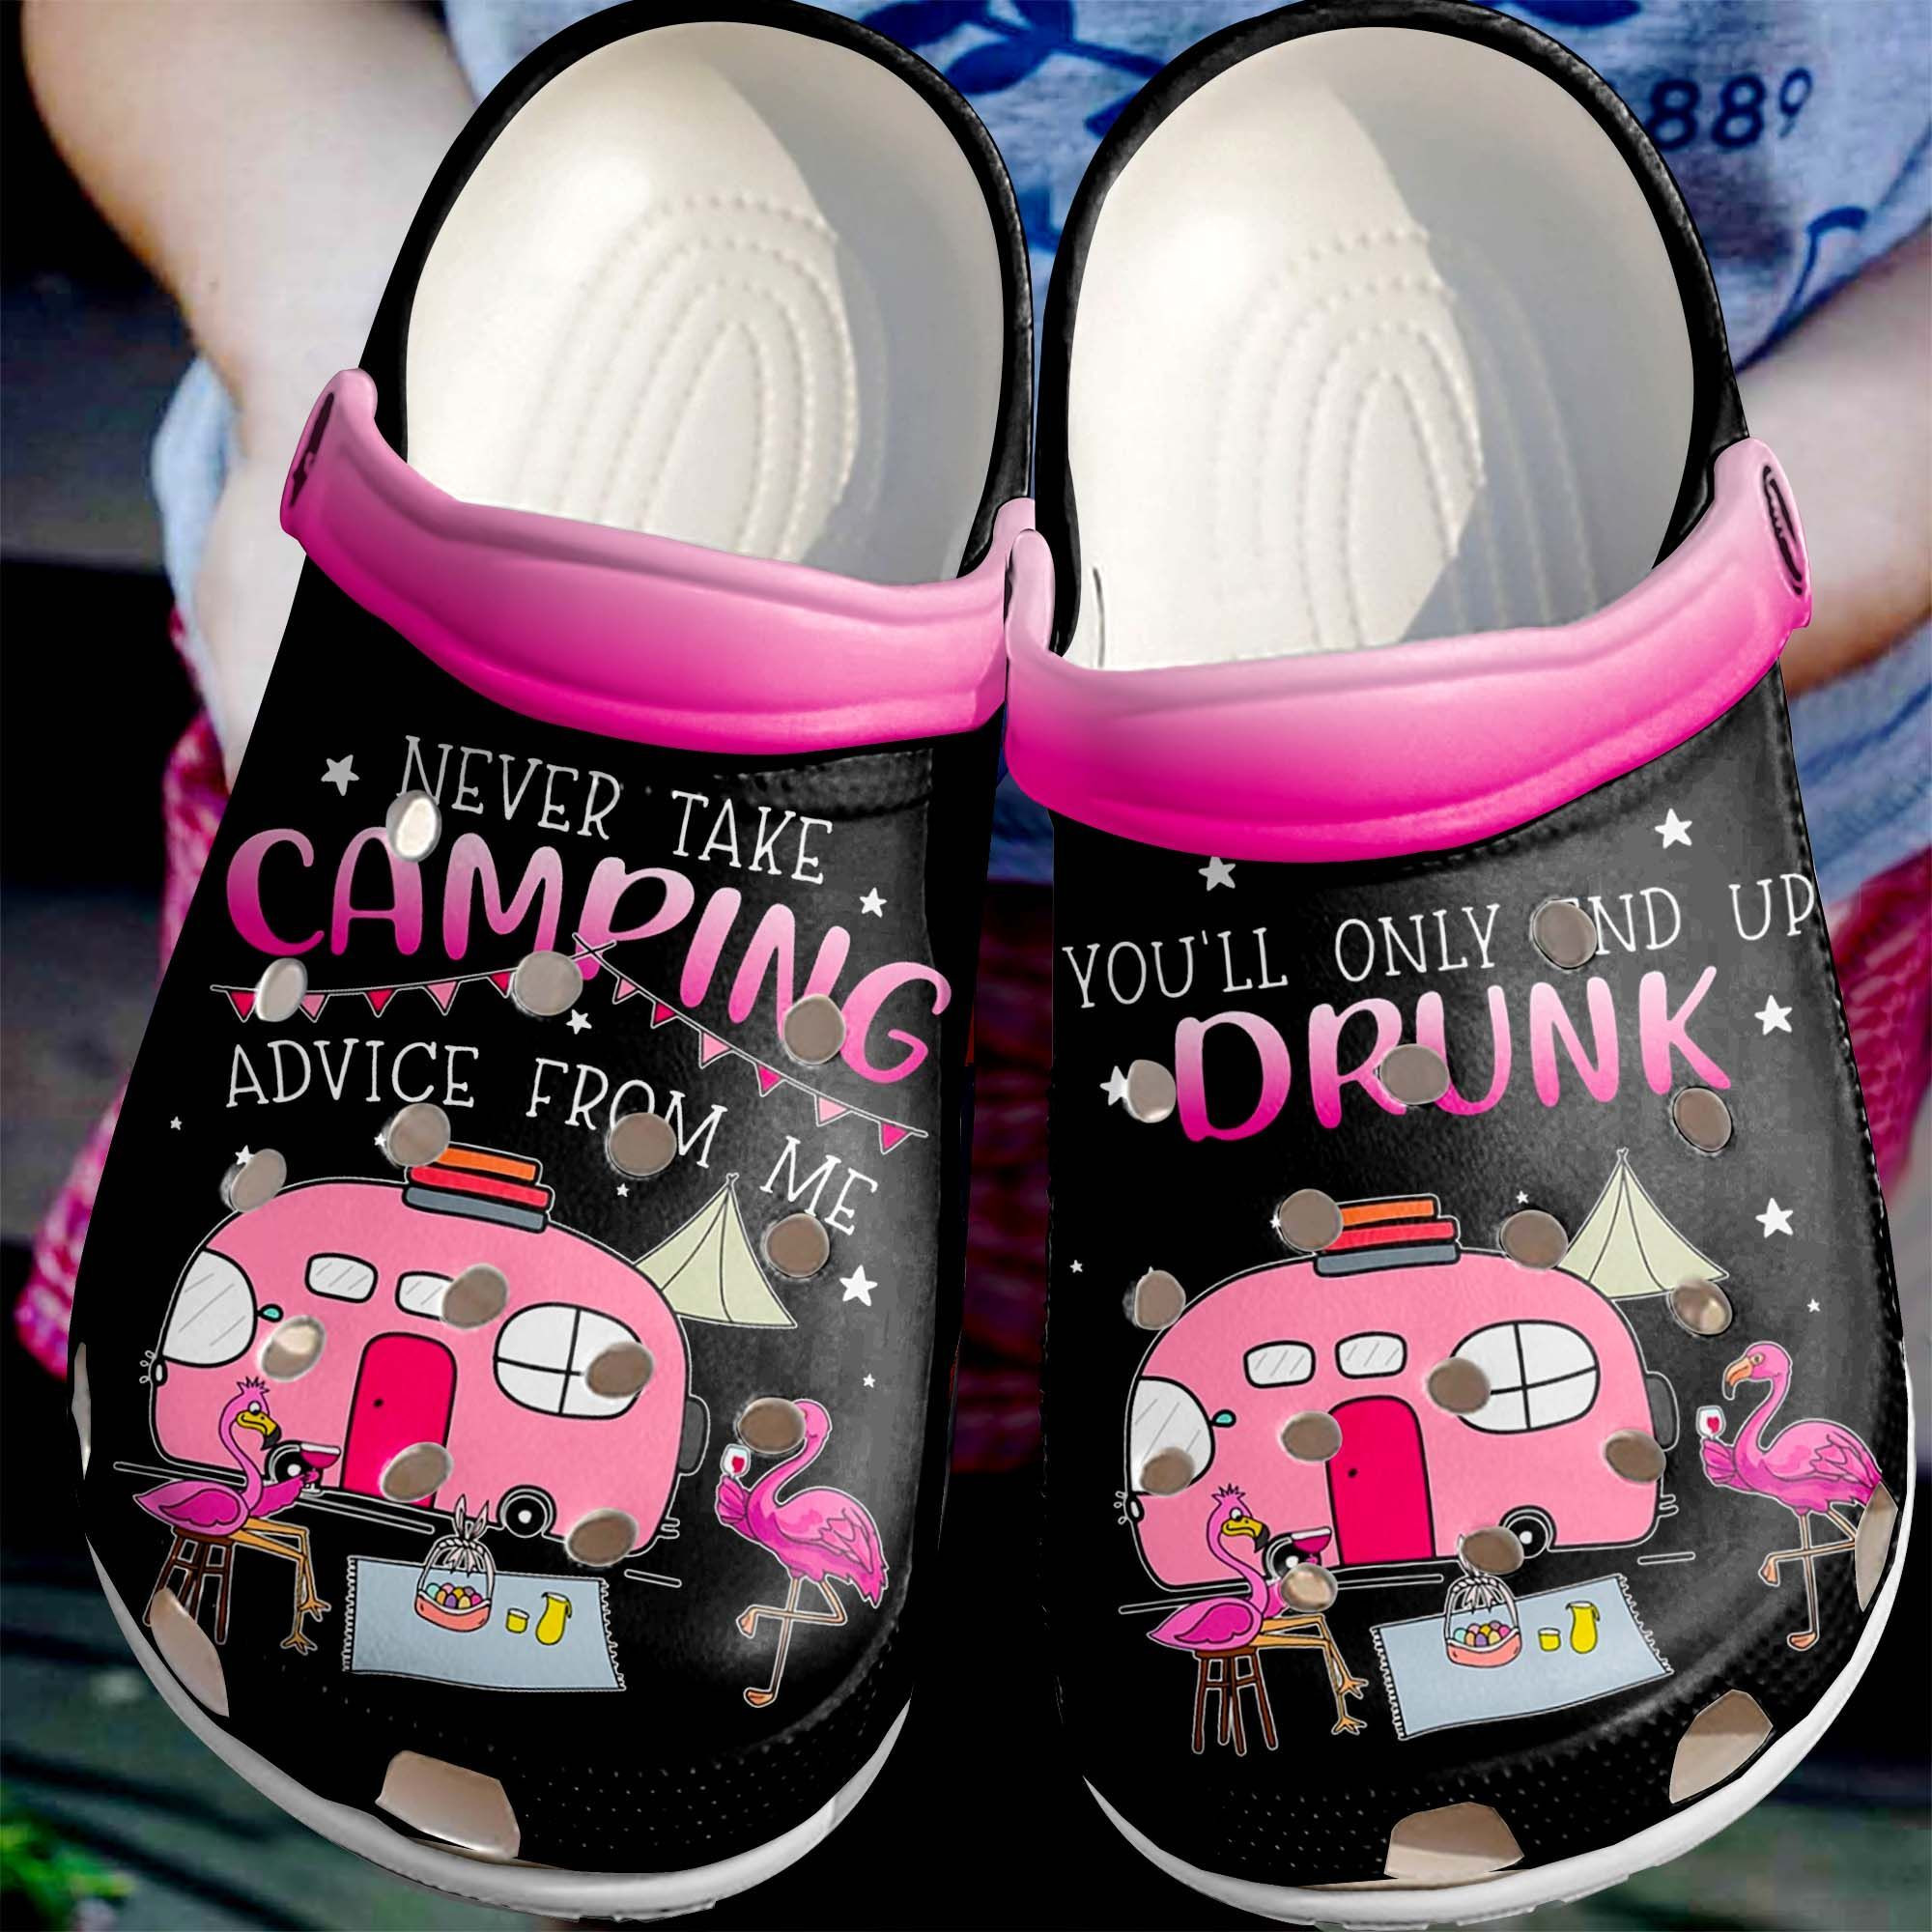 Camping Drunk With Flamingo Shoes Clog Never Take Camping Advice From Me Crocs Crocbland Clog